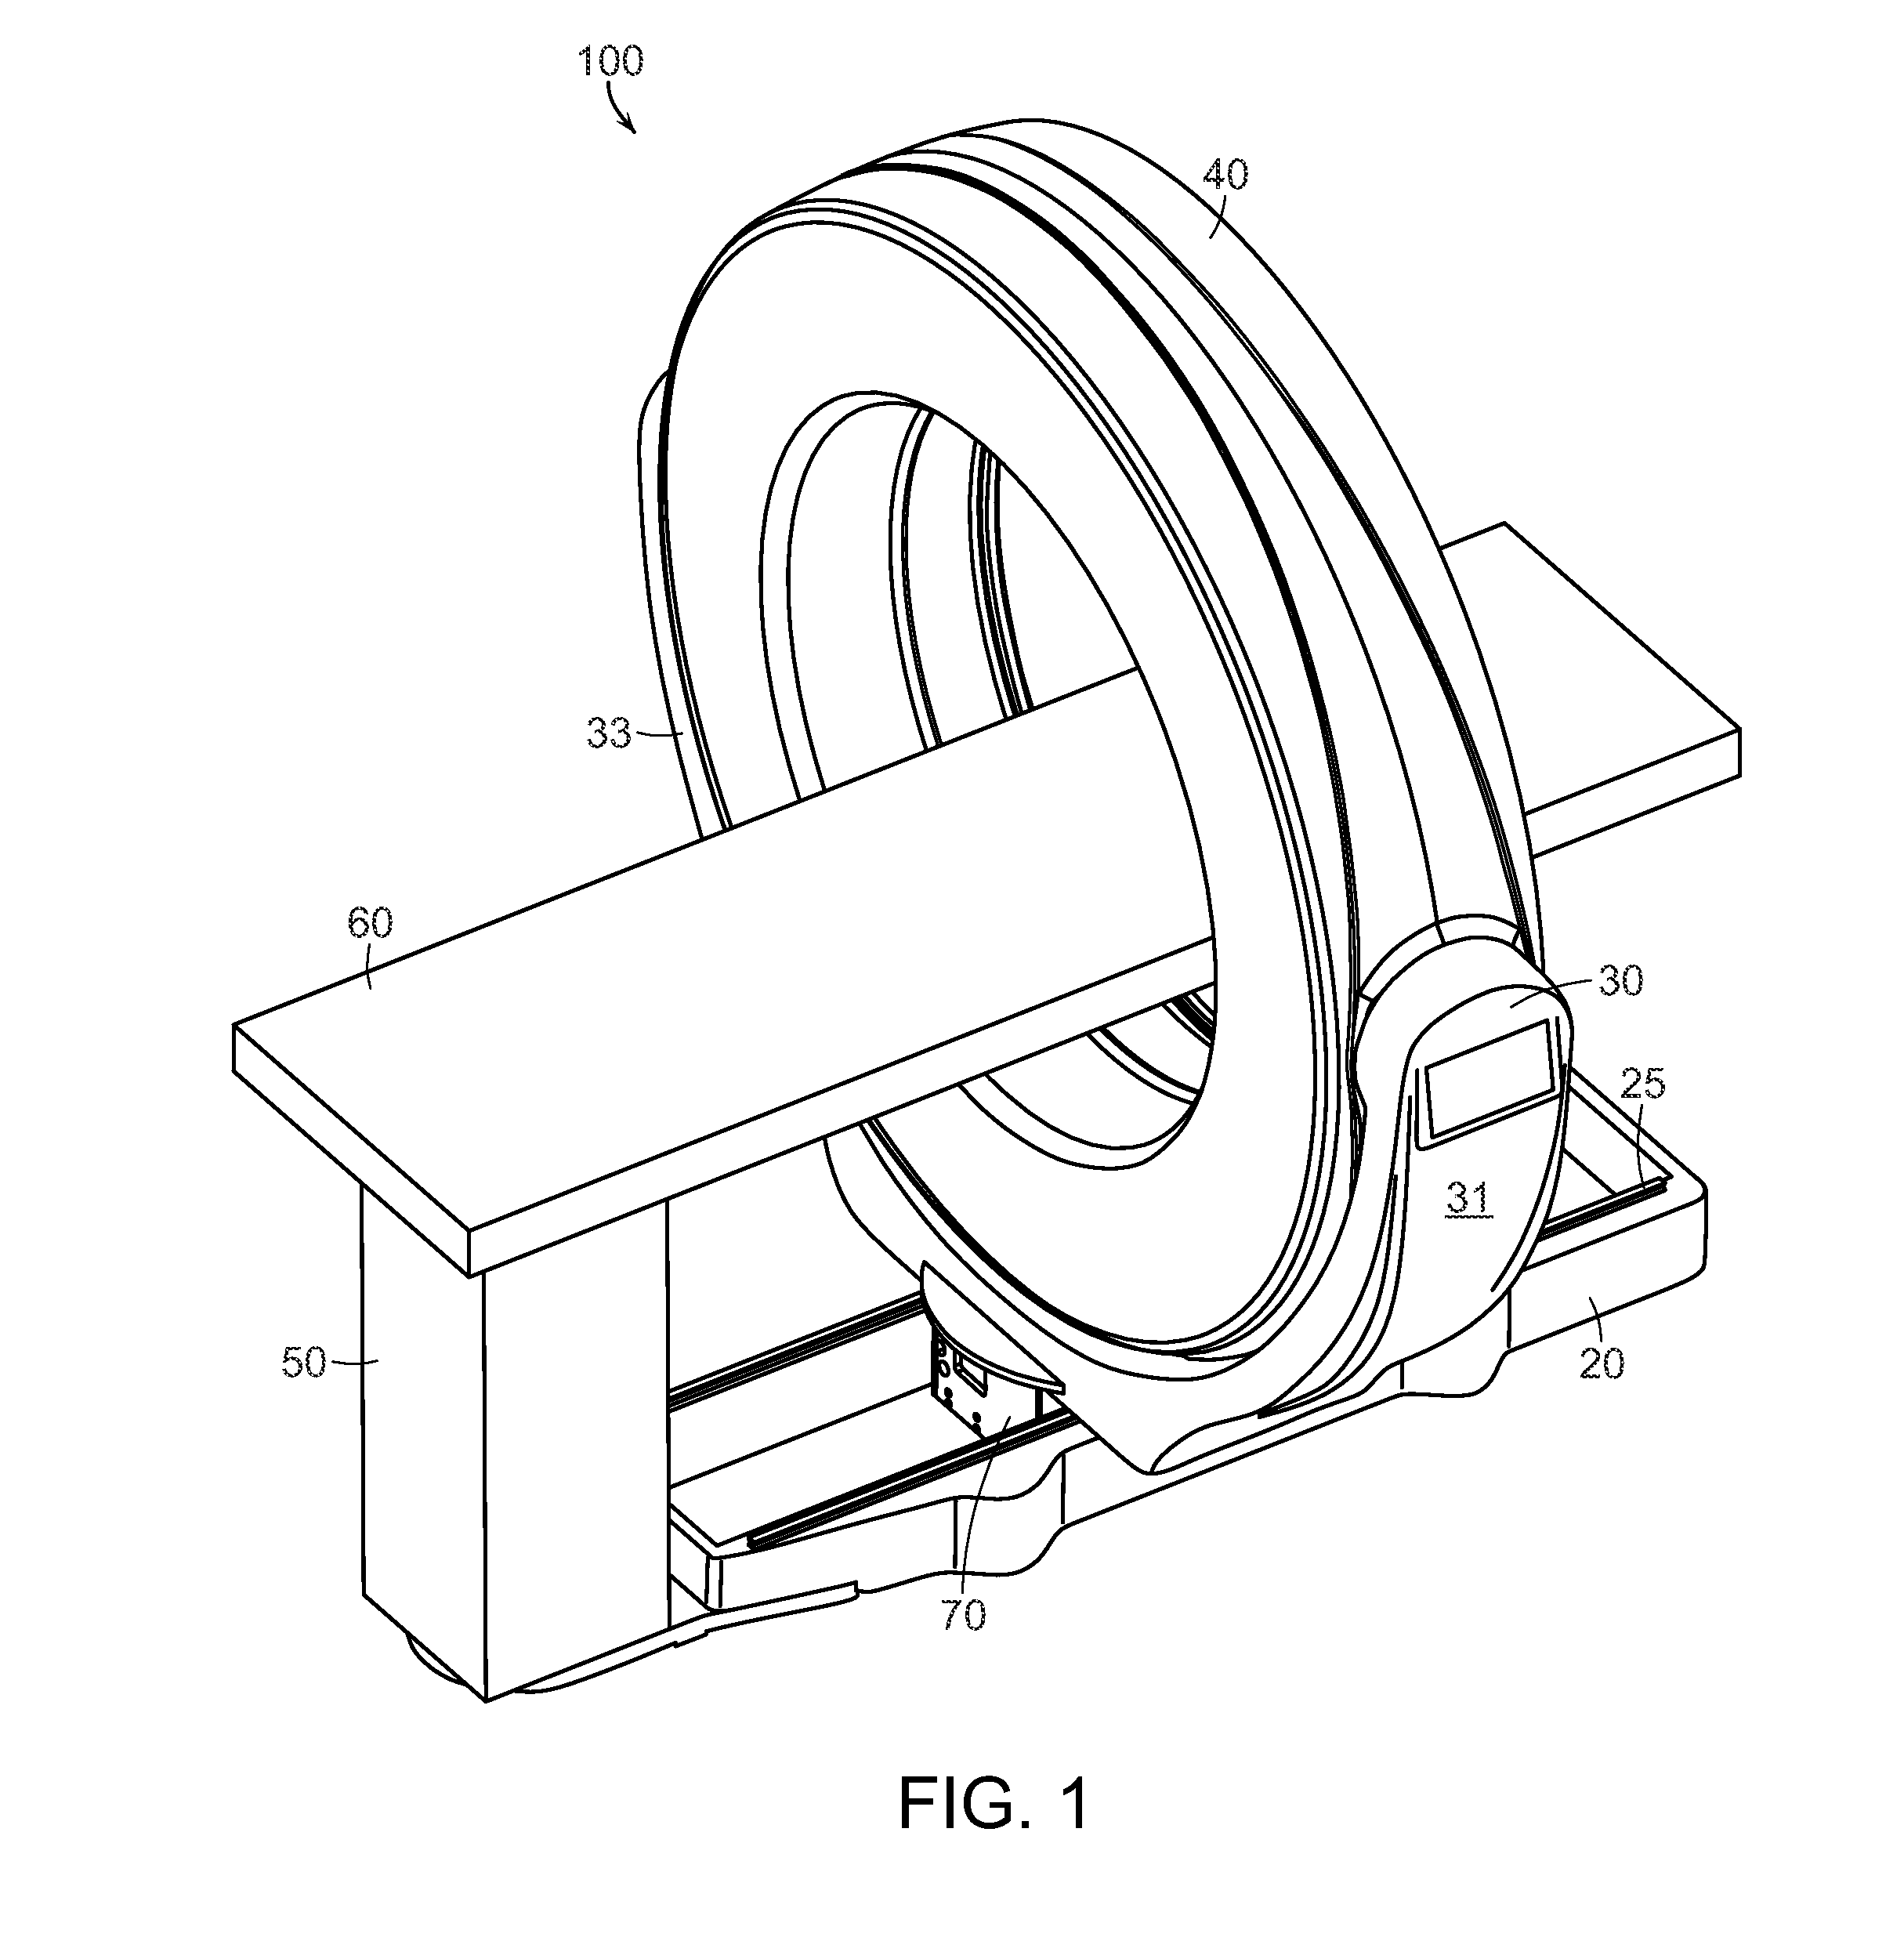 Diagnostic imaging apparatus with airflow cooling system